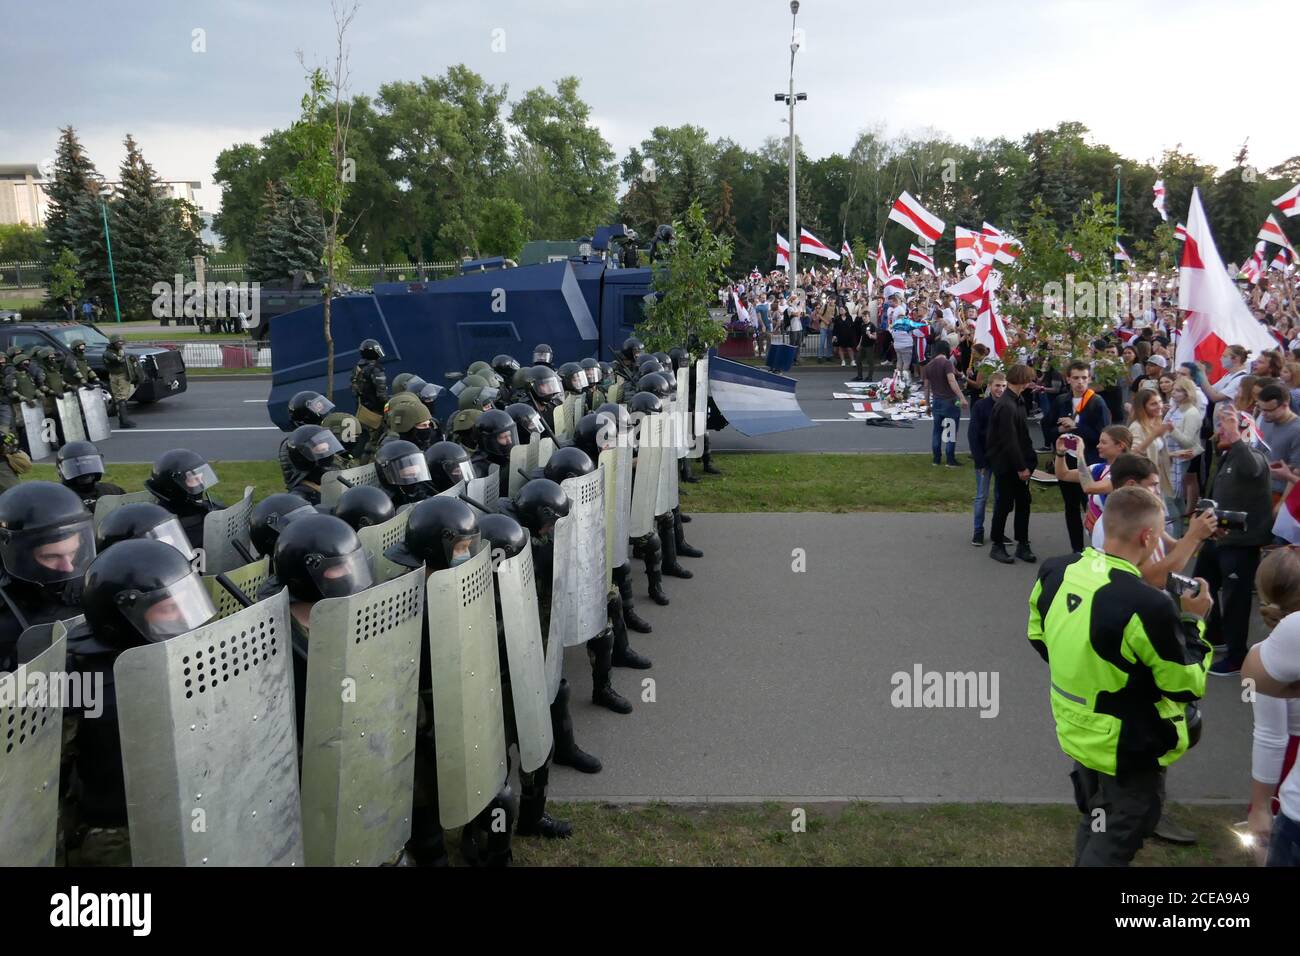 Minsk, Belarus - August 30, 2020. Police with shields. Peaceful protest actions against the current government after the presidential election in Stock Photo